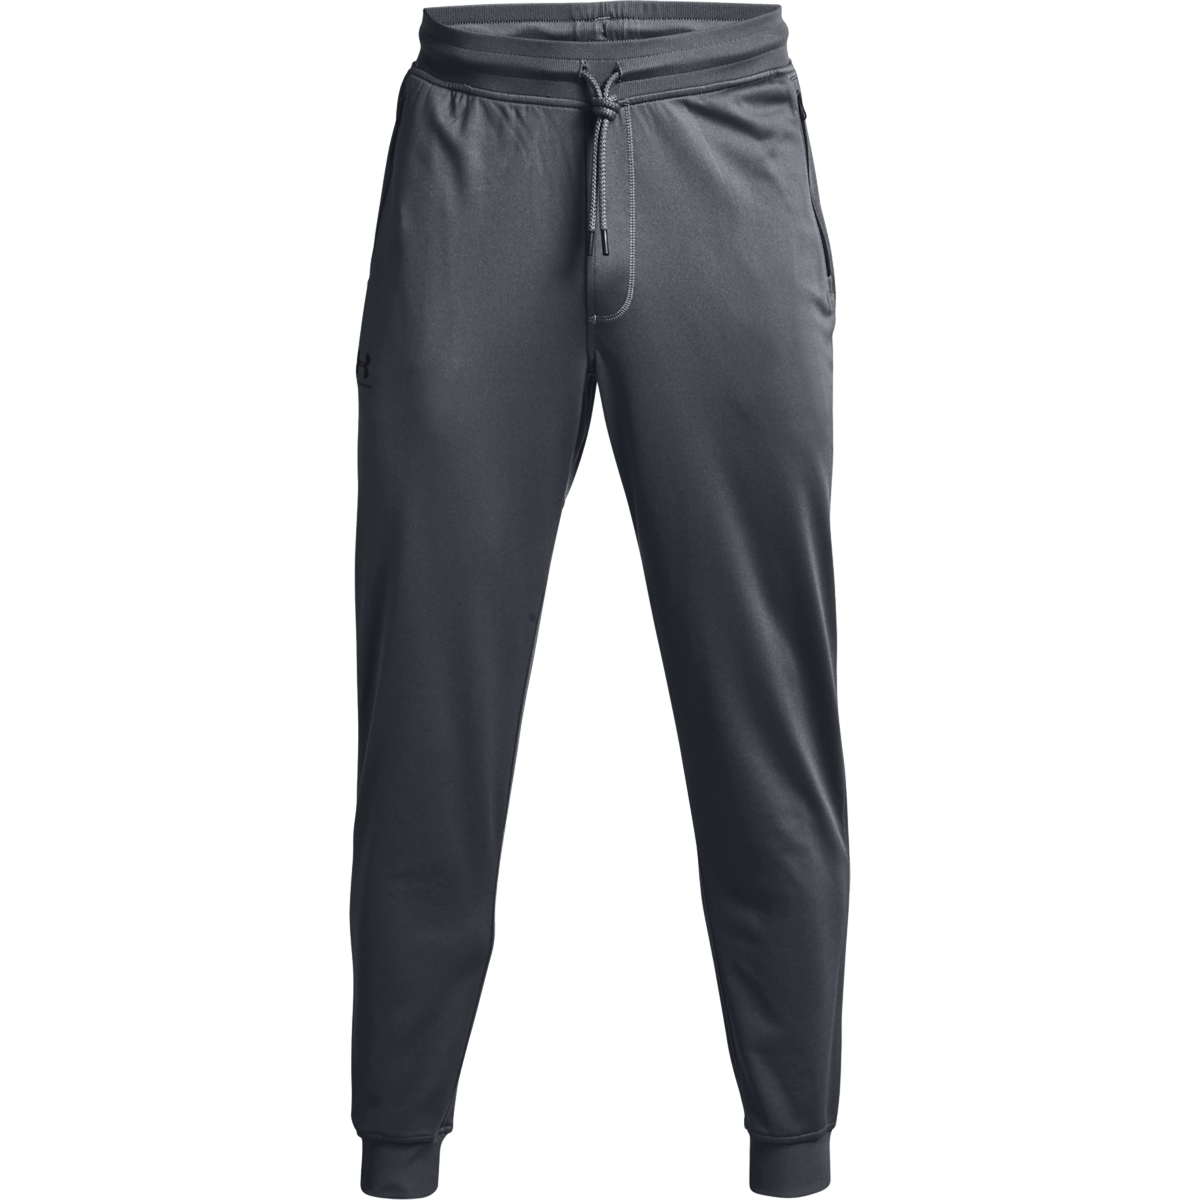 Under Armour Sweatpants Girls Youth Small Black Joggers Cold Gear Loose Fit